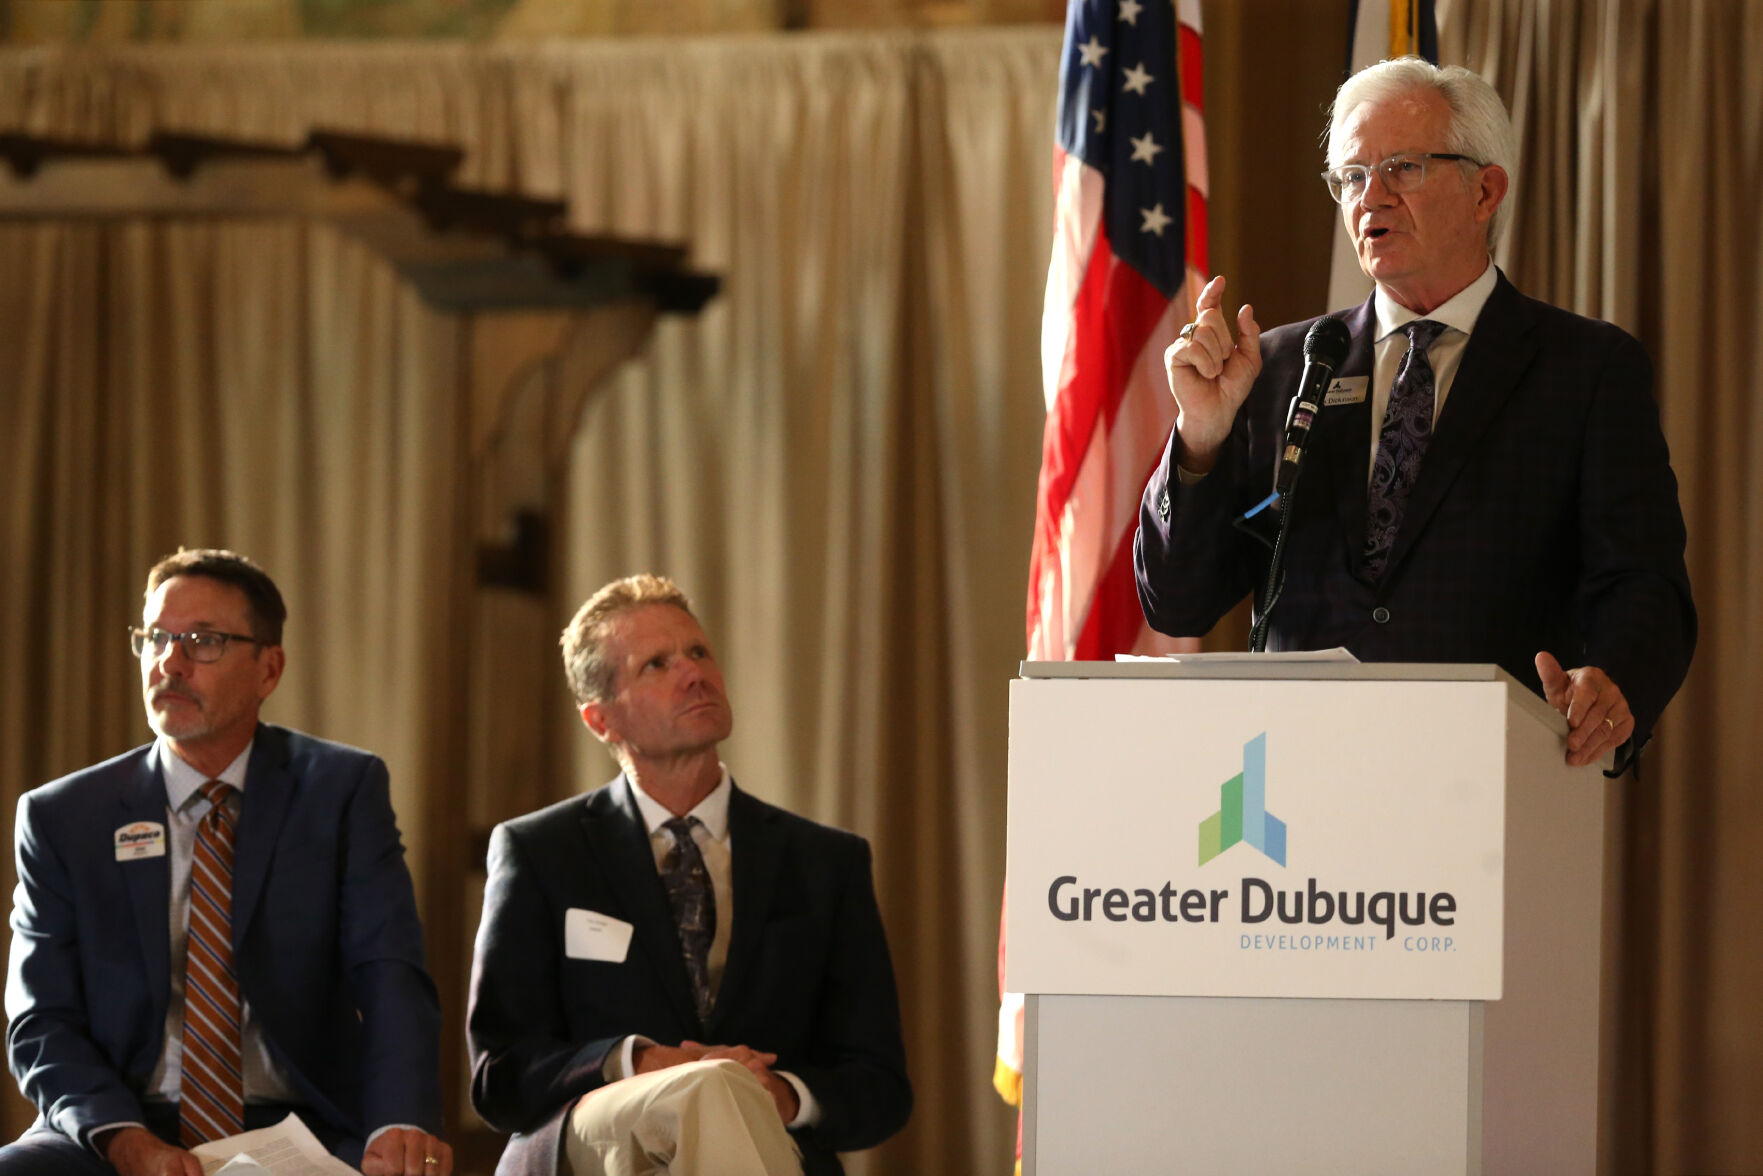 Rick Dickinson, president and CEO of Greater Dubuque Development Corp., speaks during the organization’s annual meeting at Steeple Square.    PHOTO CREDIT: Jessica Reilly